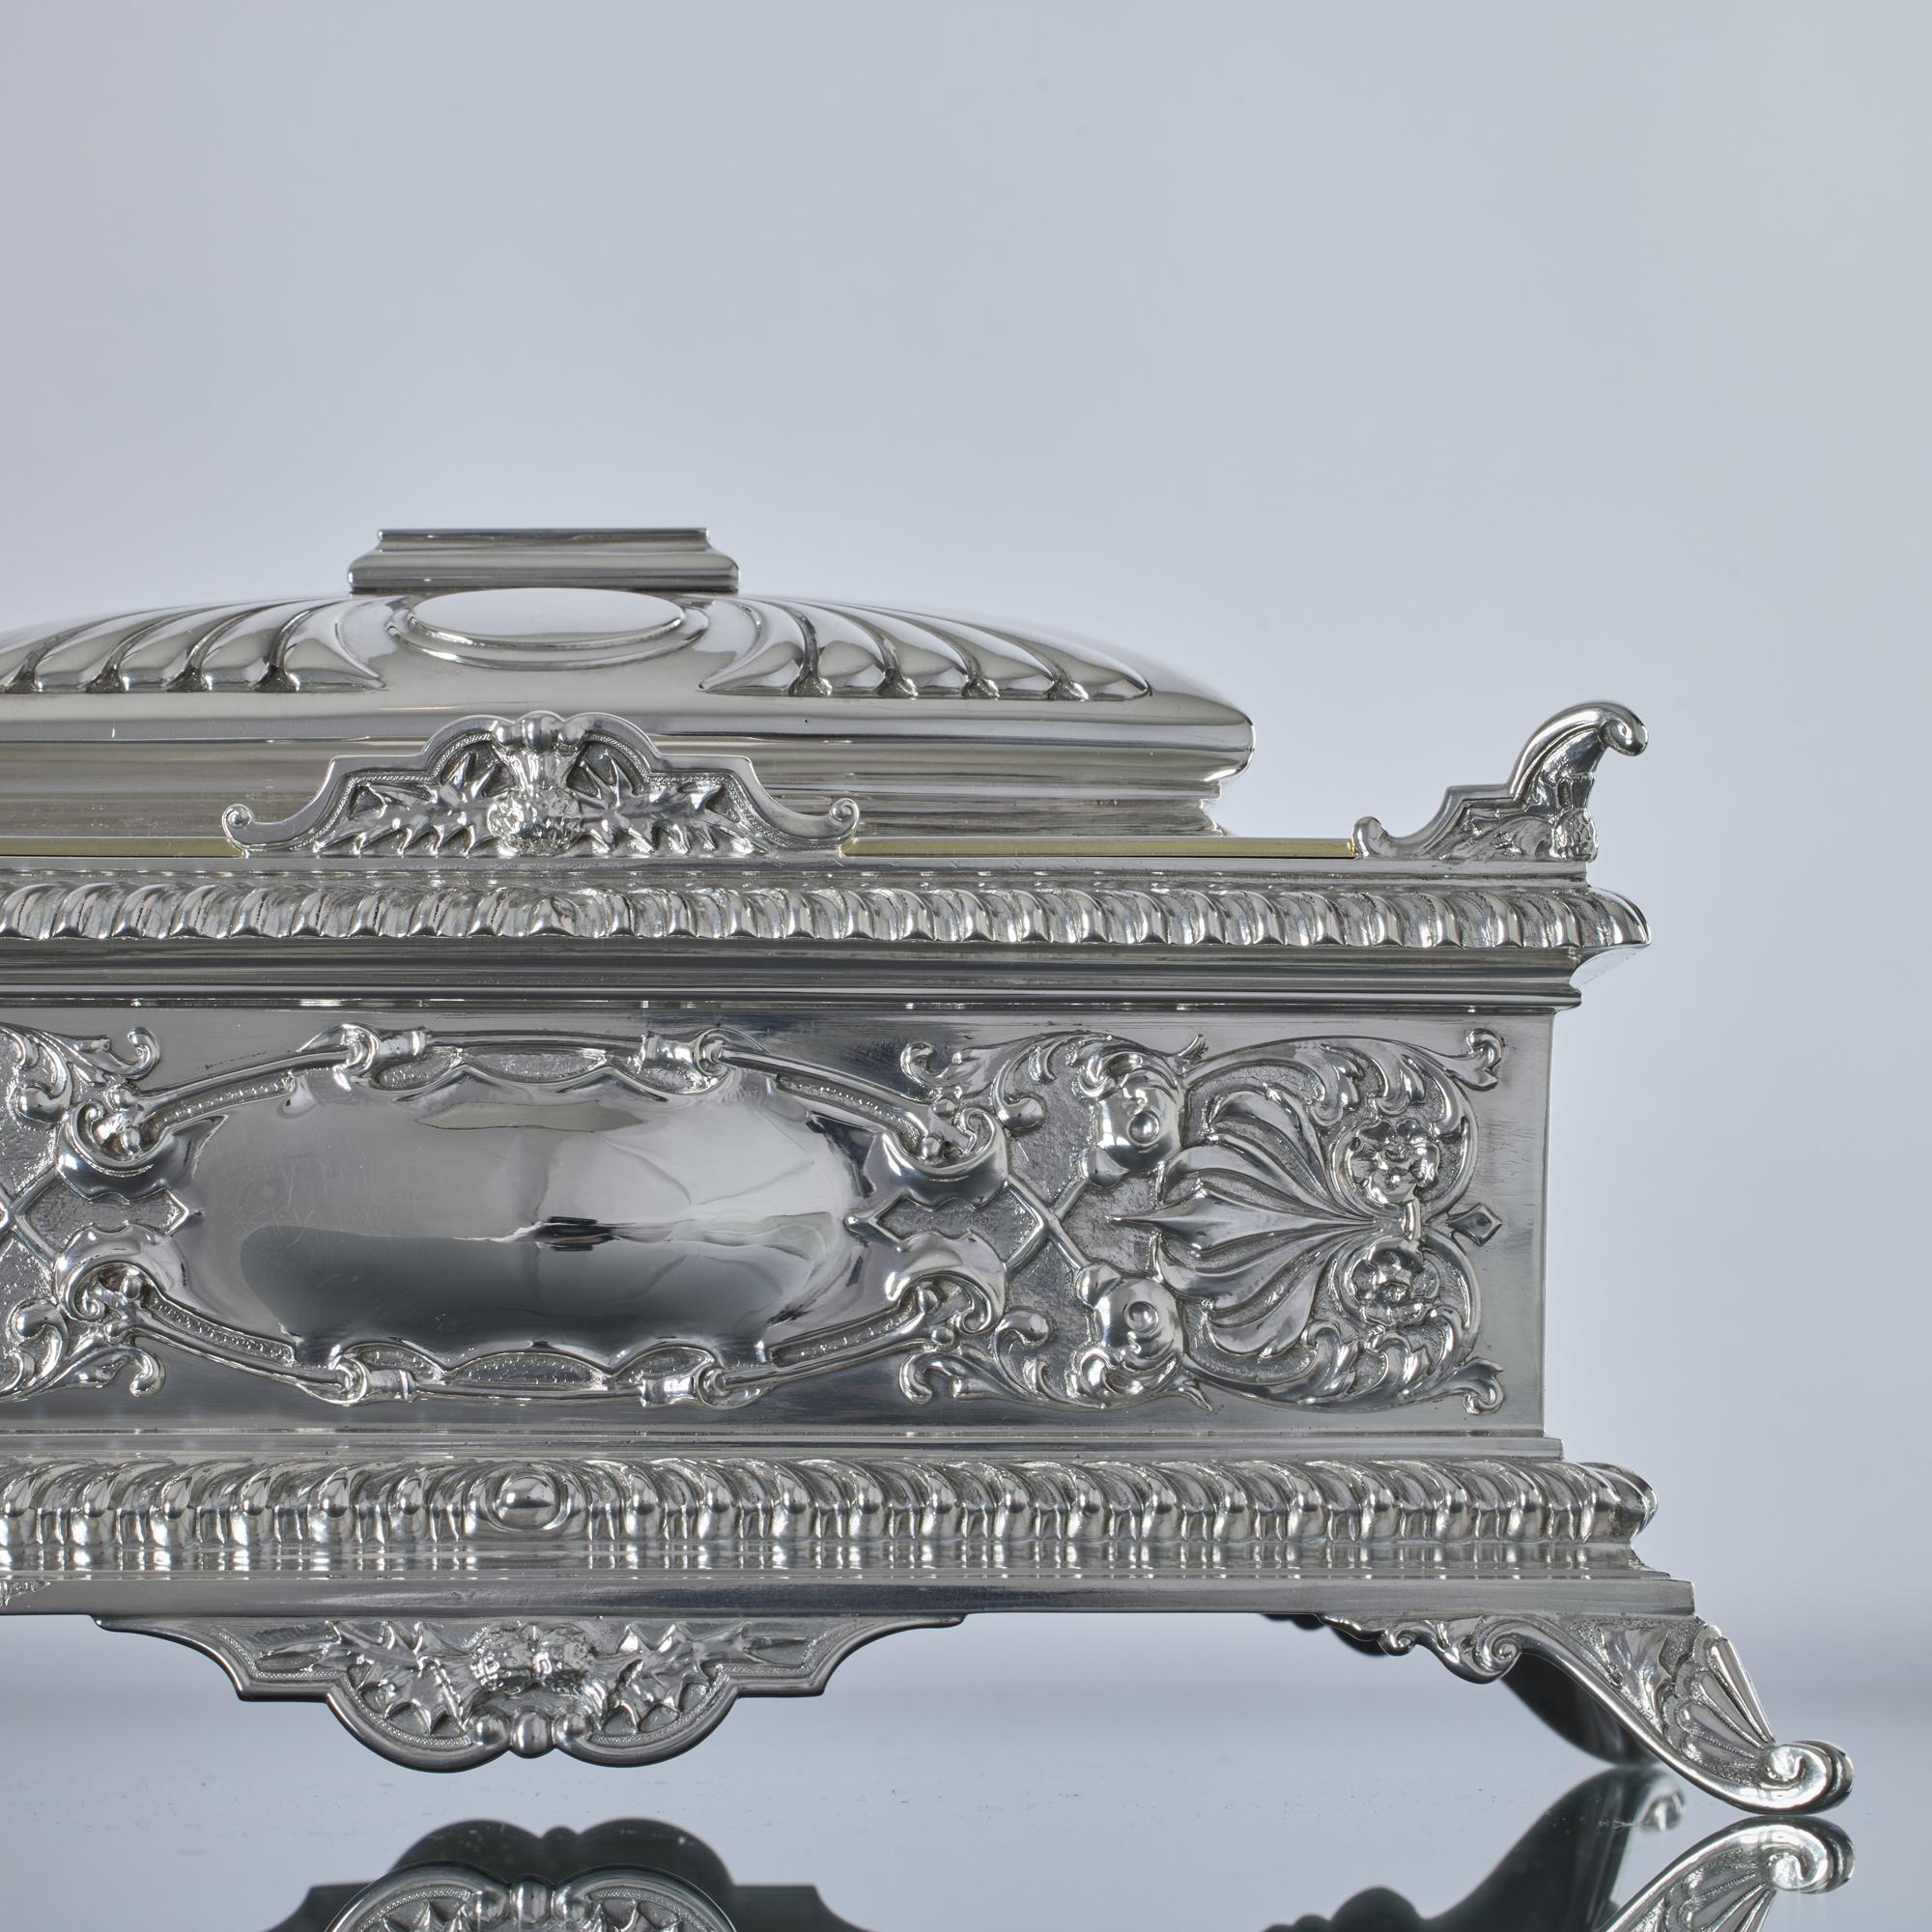 Large and decorative antique silver jewellery box of superb quality and lined with green velvet. The exterior has cast and applied supports and corners, domed central panel on the lid, slant gadroon borders and embossed panels. There are applied